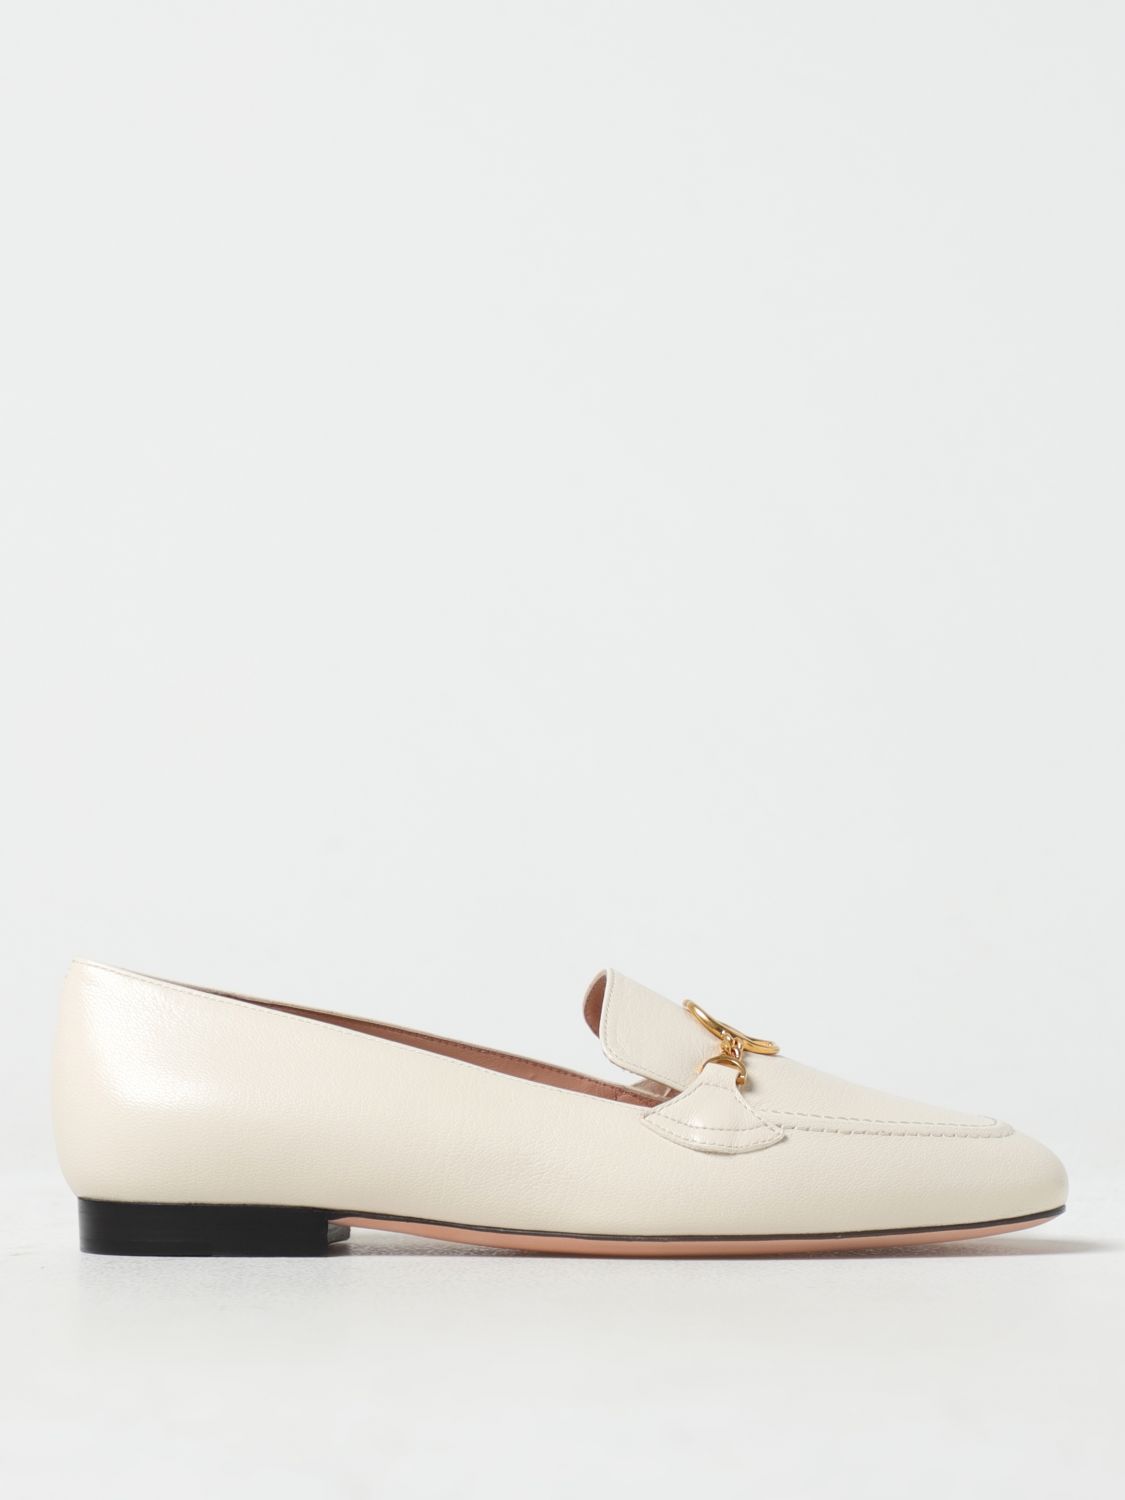 BALLY OBRIEN MOCCASINS IN MICRO GRAINED LEATHER,E56589001